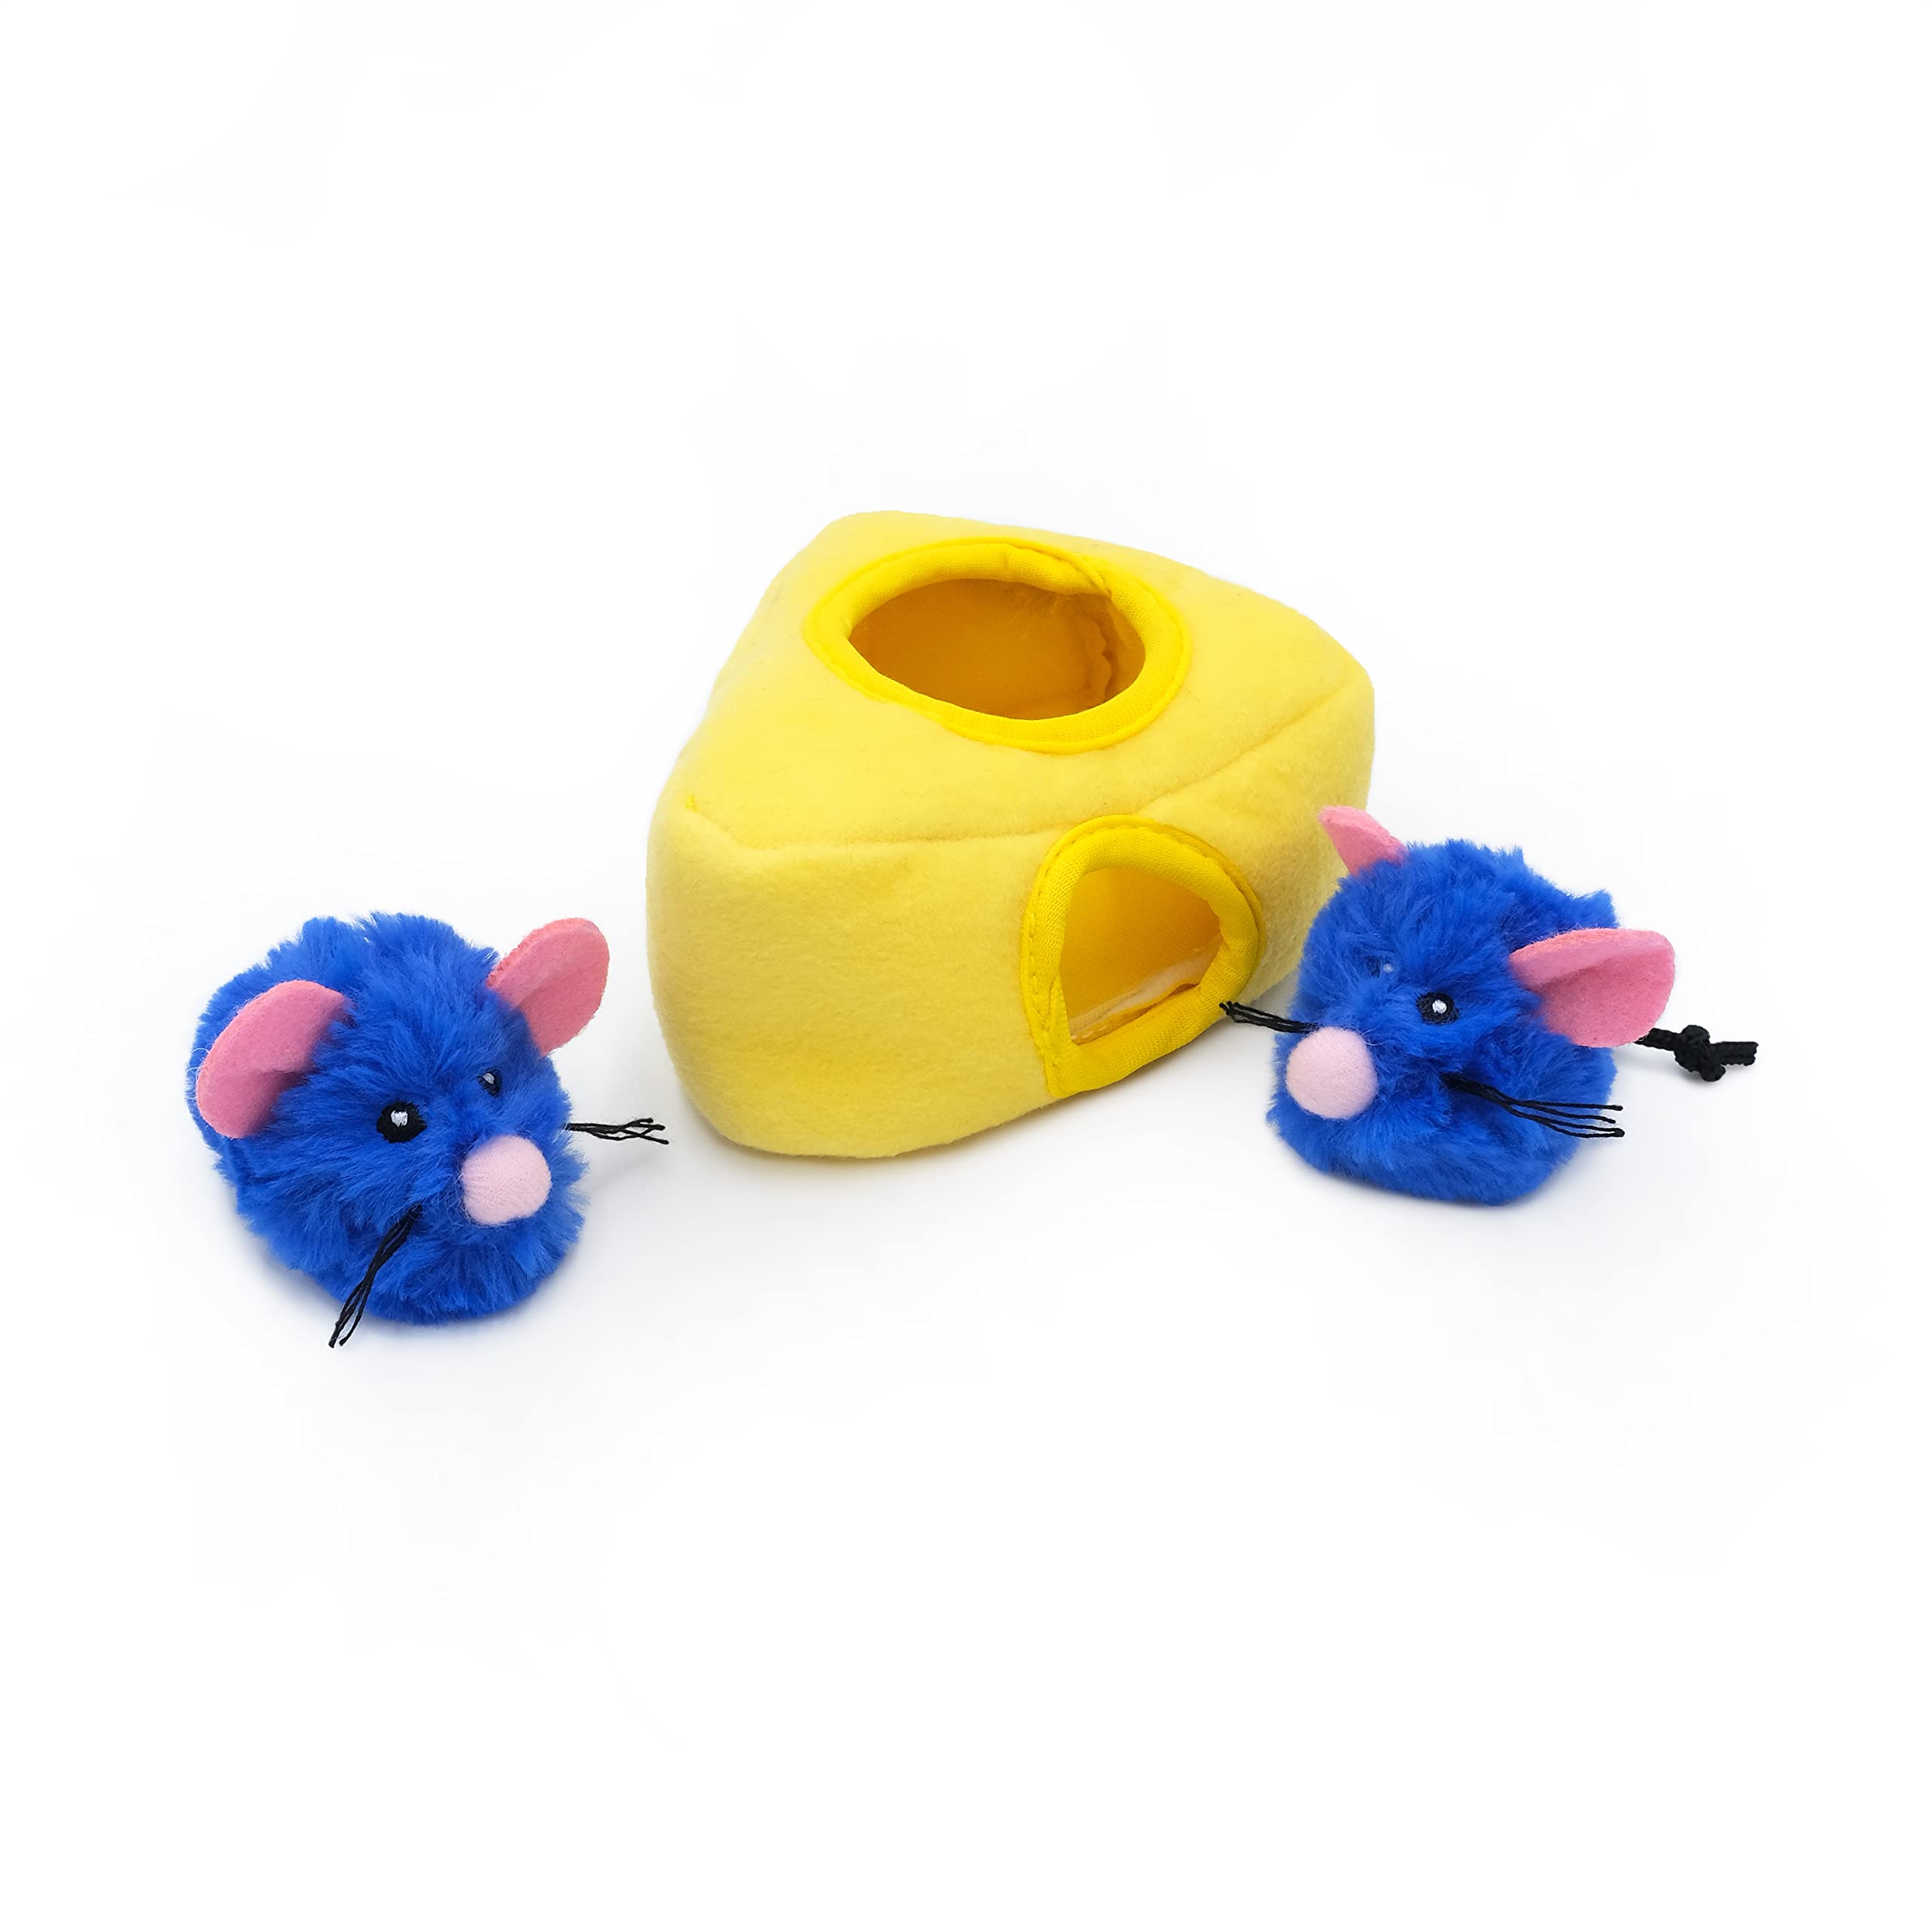 Zippy Paws Burrow Mice N' Cheese Hide-and-Seek Interactive Squeak and Plush Cat Toy - Small  